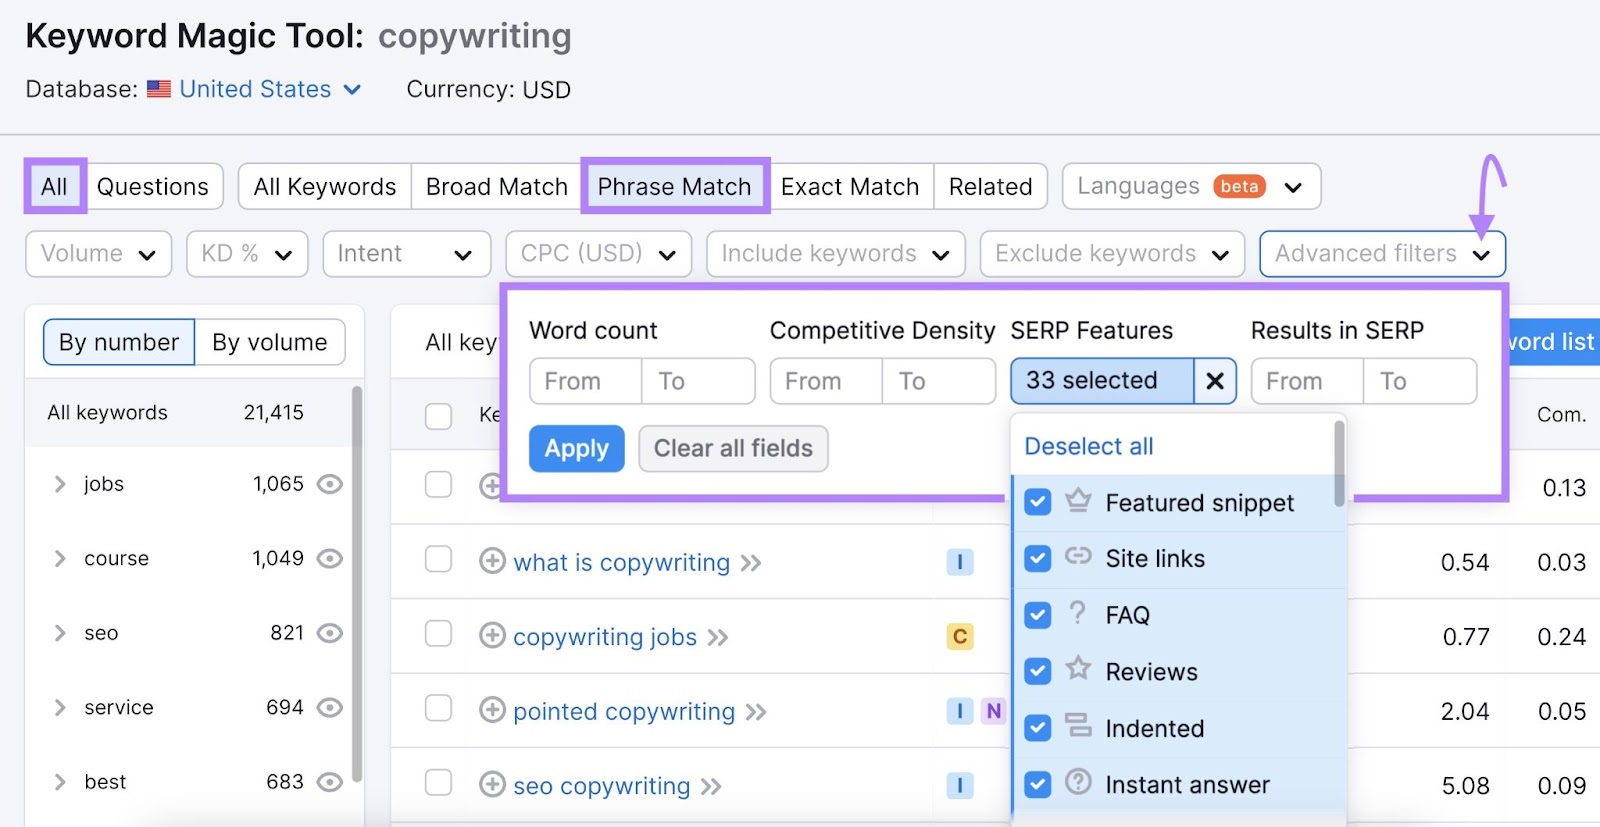 "All," "Phrase Match," and "Advanced filters" pop-up opened in Keyword Magic Tool